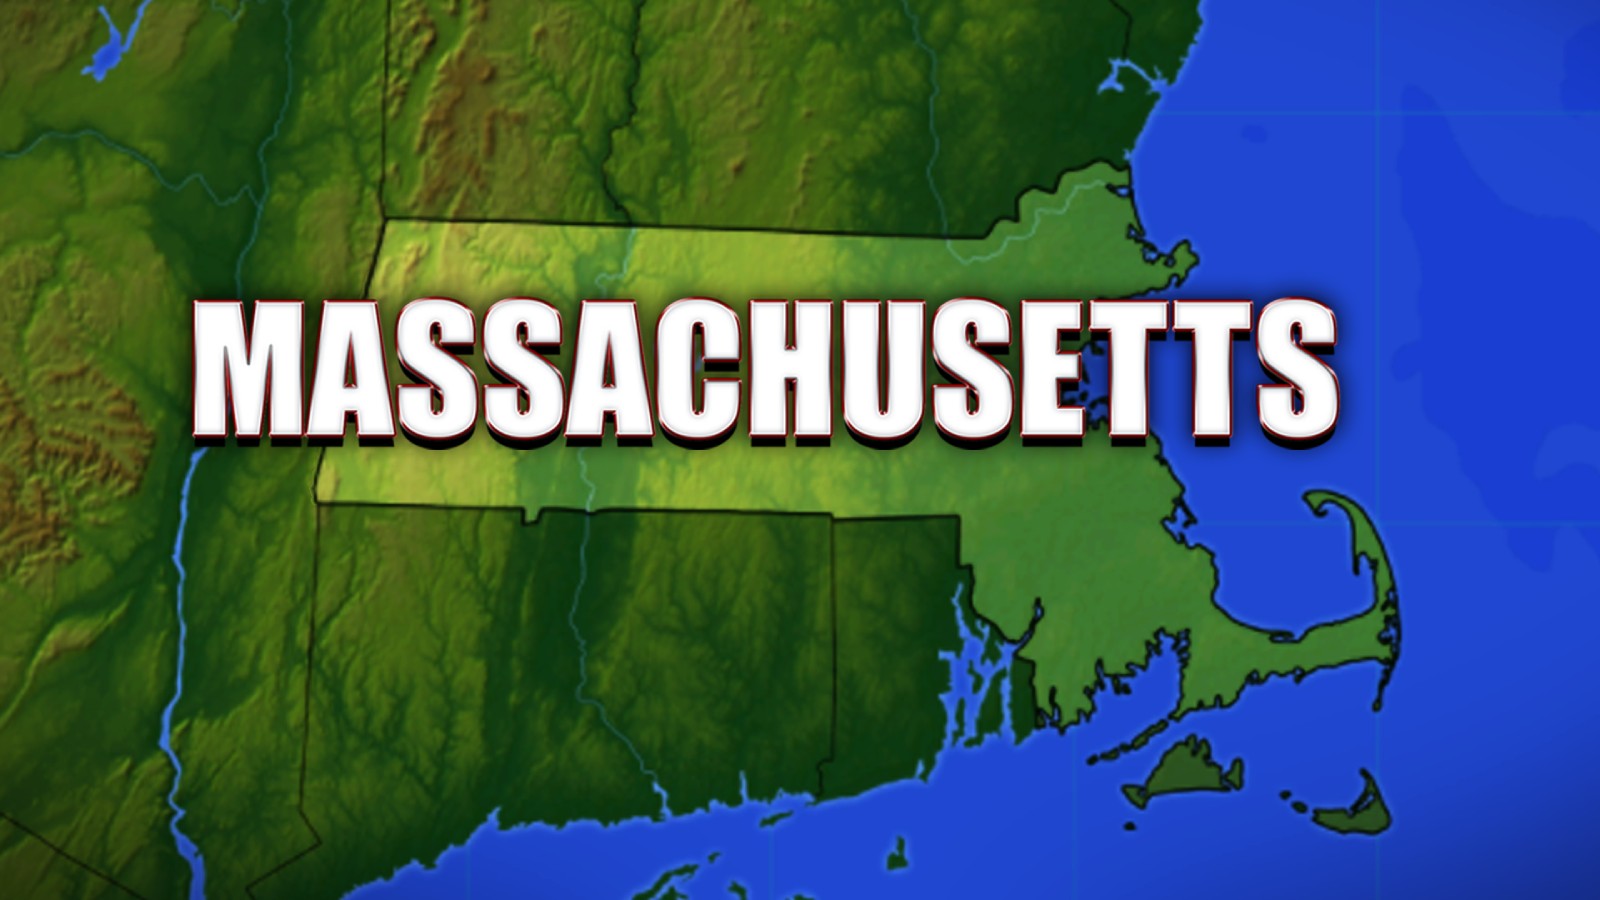 Map of massacusetts. Image source WHDH